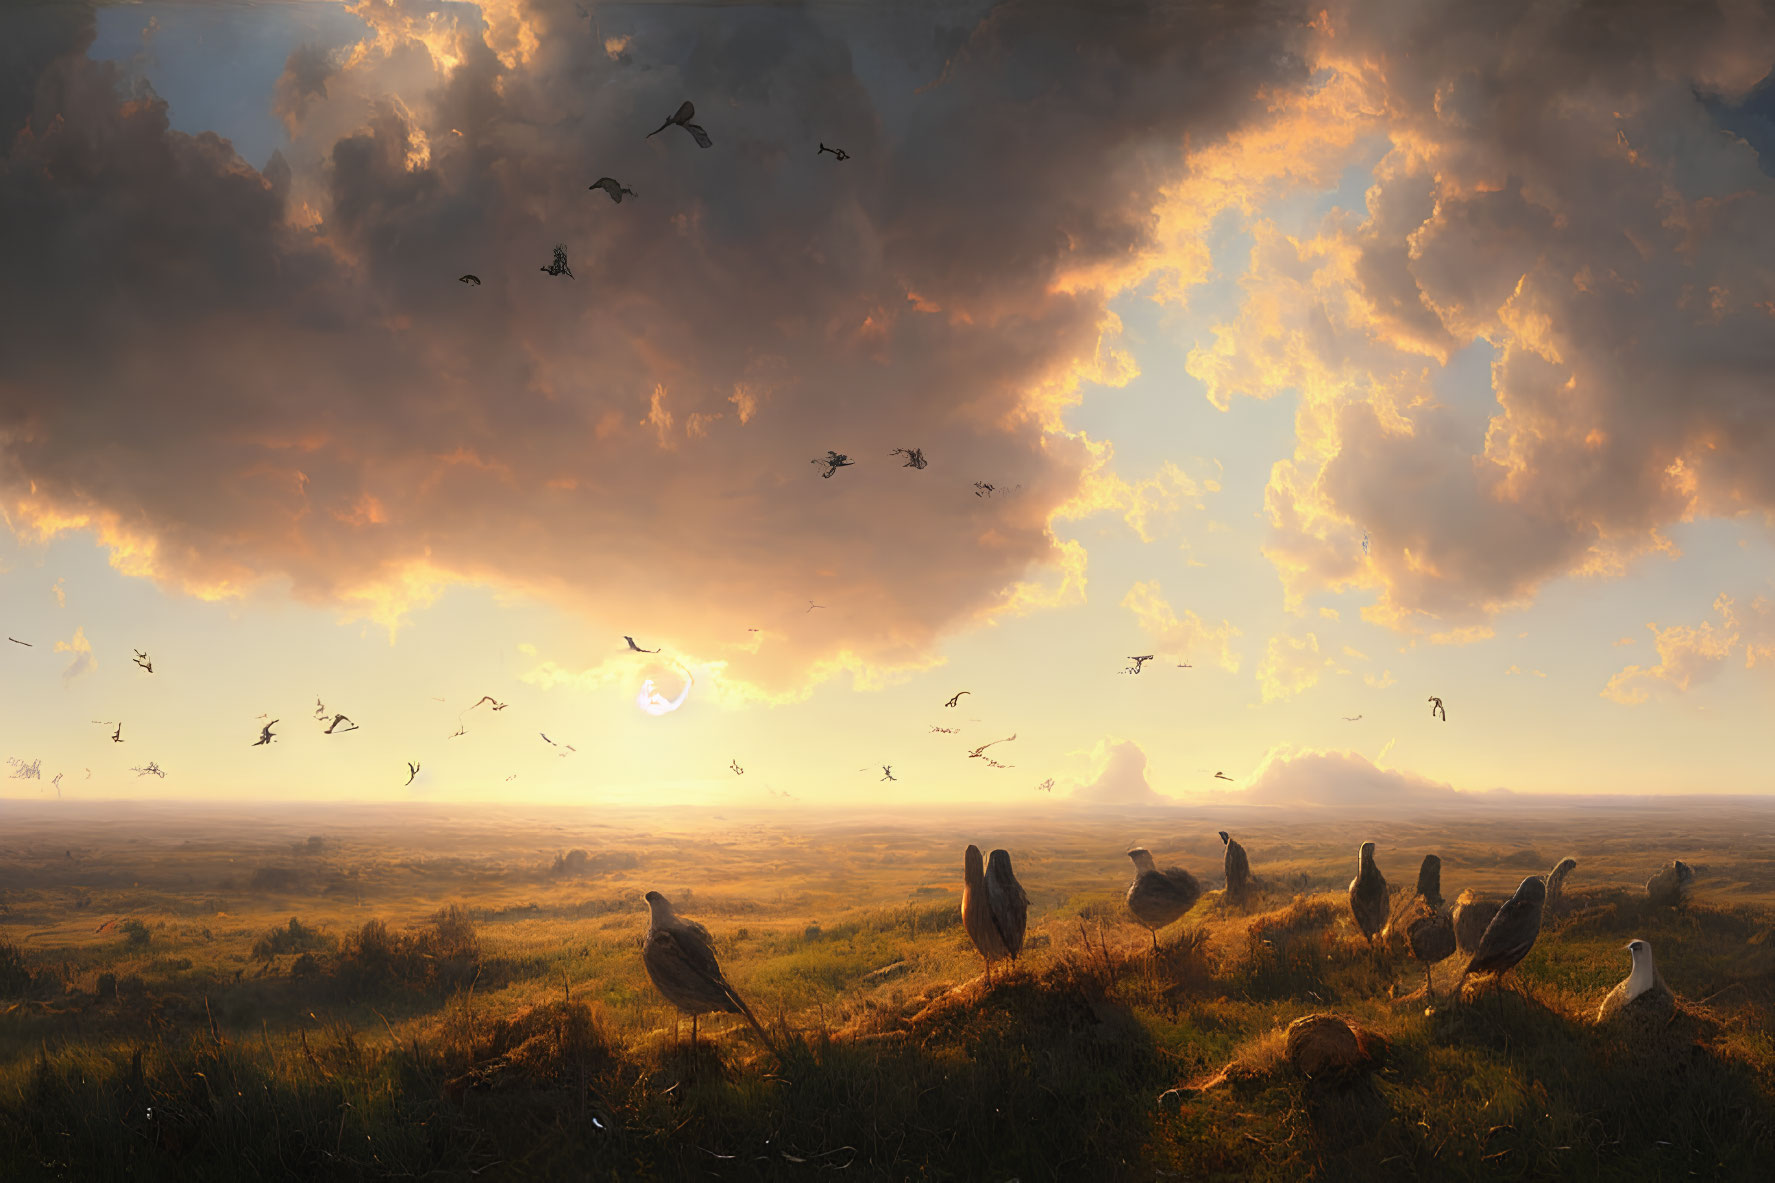 Tranquil sunset with golden hues over serene landscape and flying flock